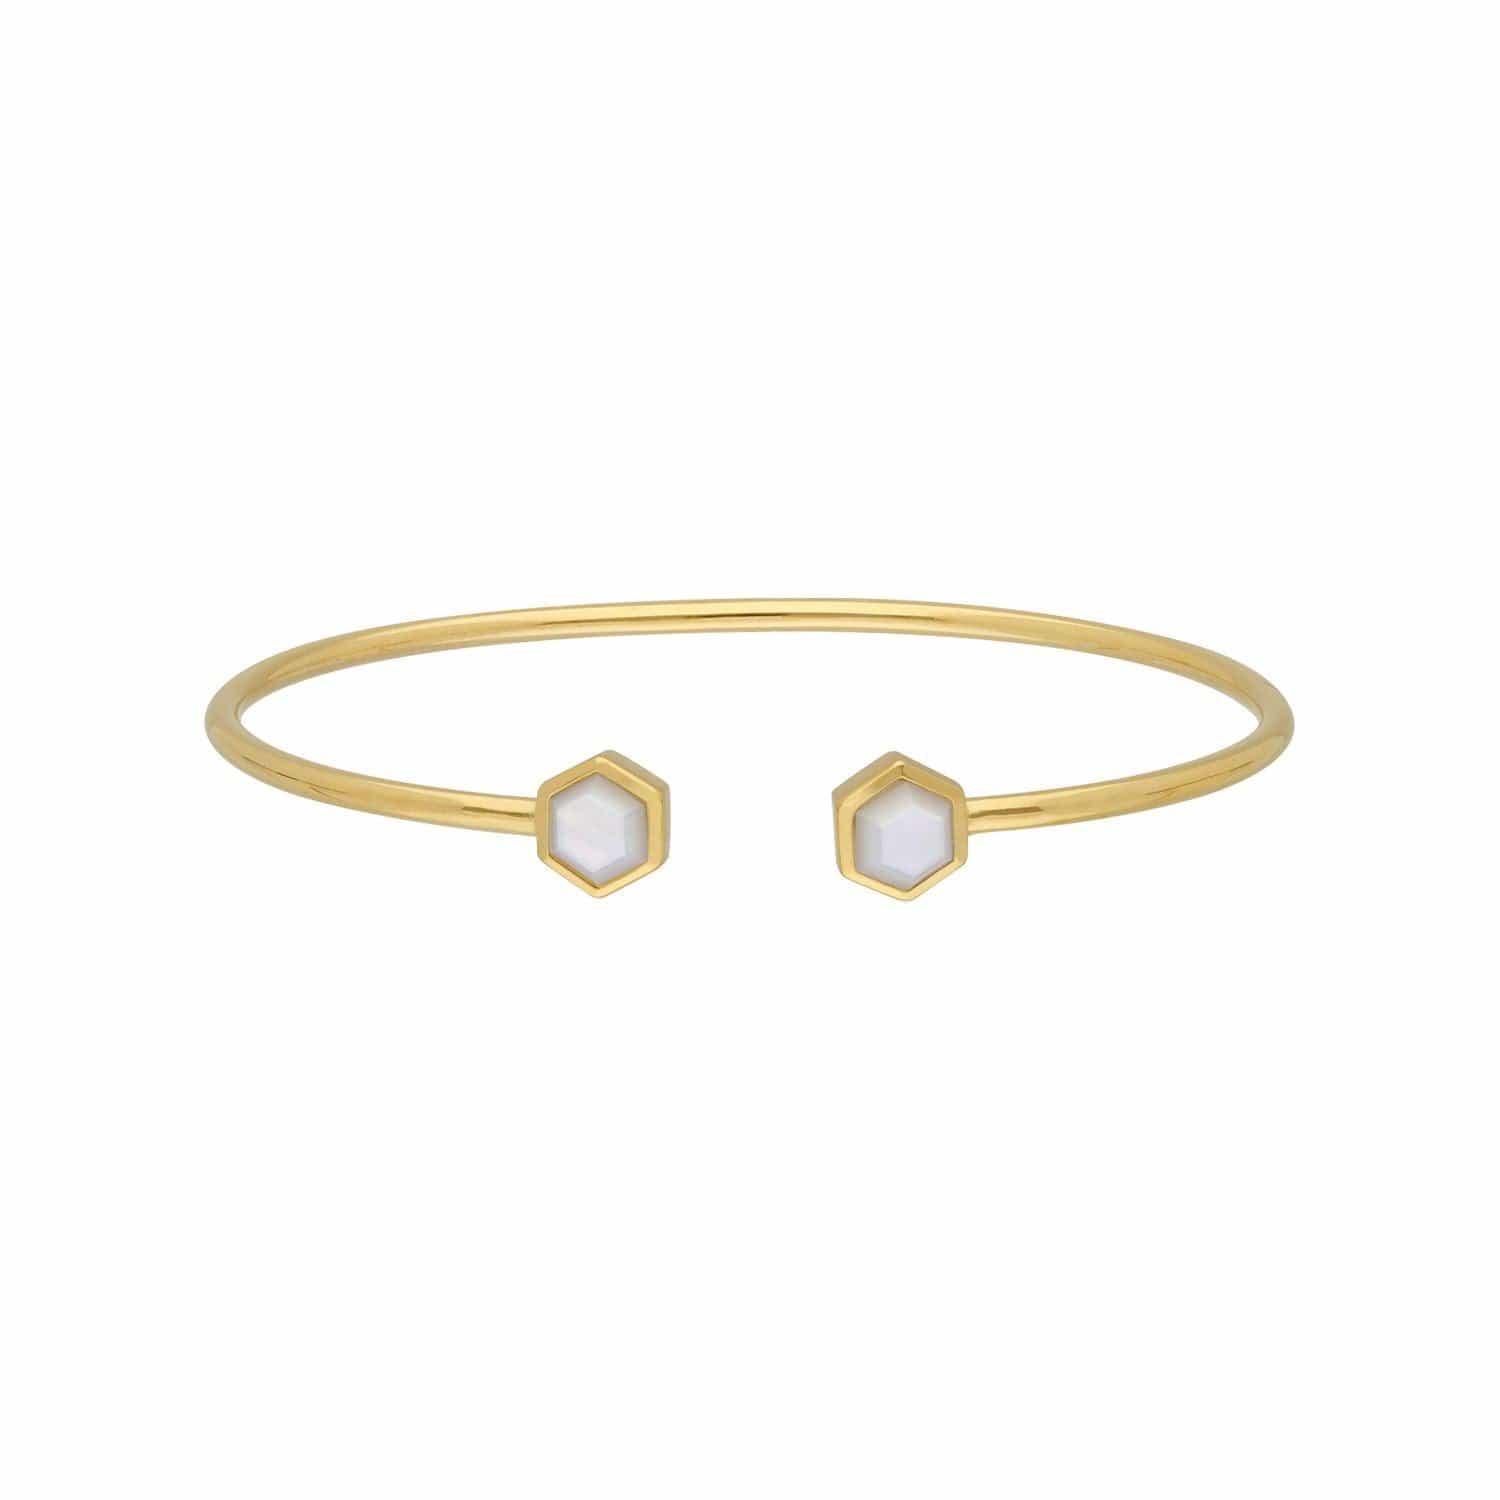 Geometric Hexagon Mother of Pearl Bangle in Gold Plated Sterling Silver